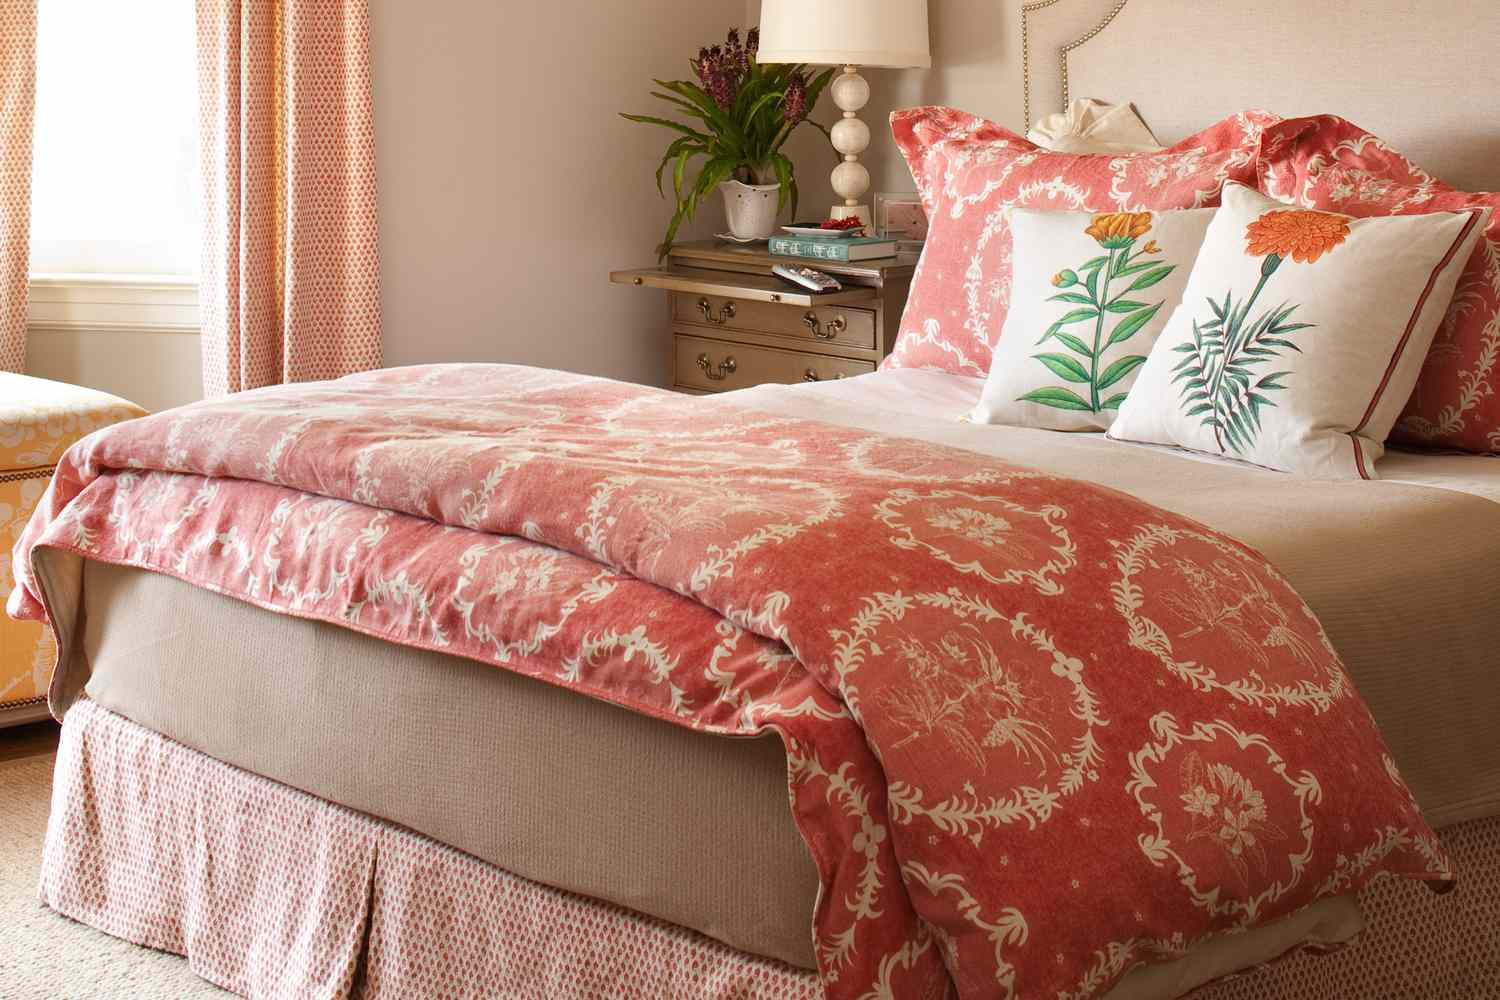 neatly made bed in bedroom with red pink duvet cover